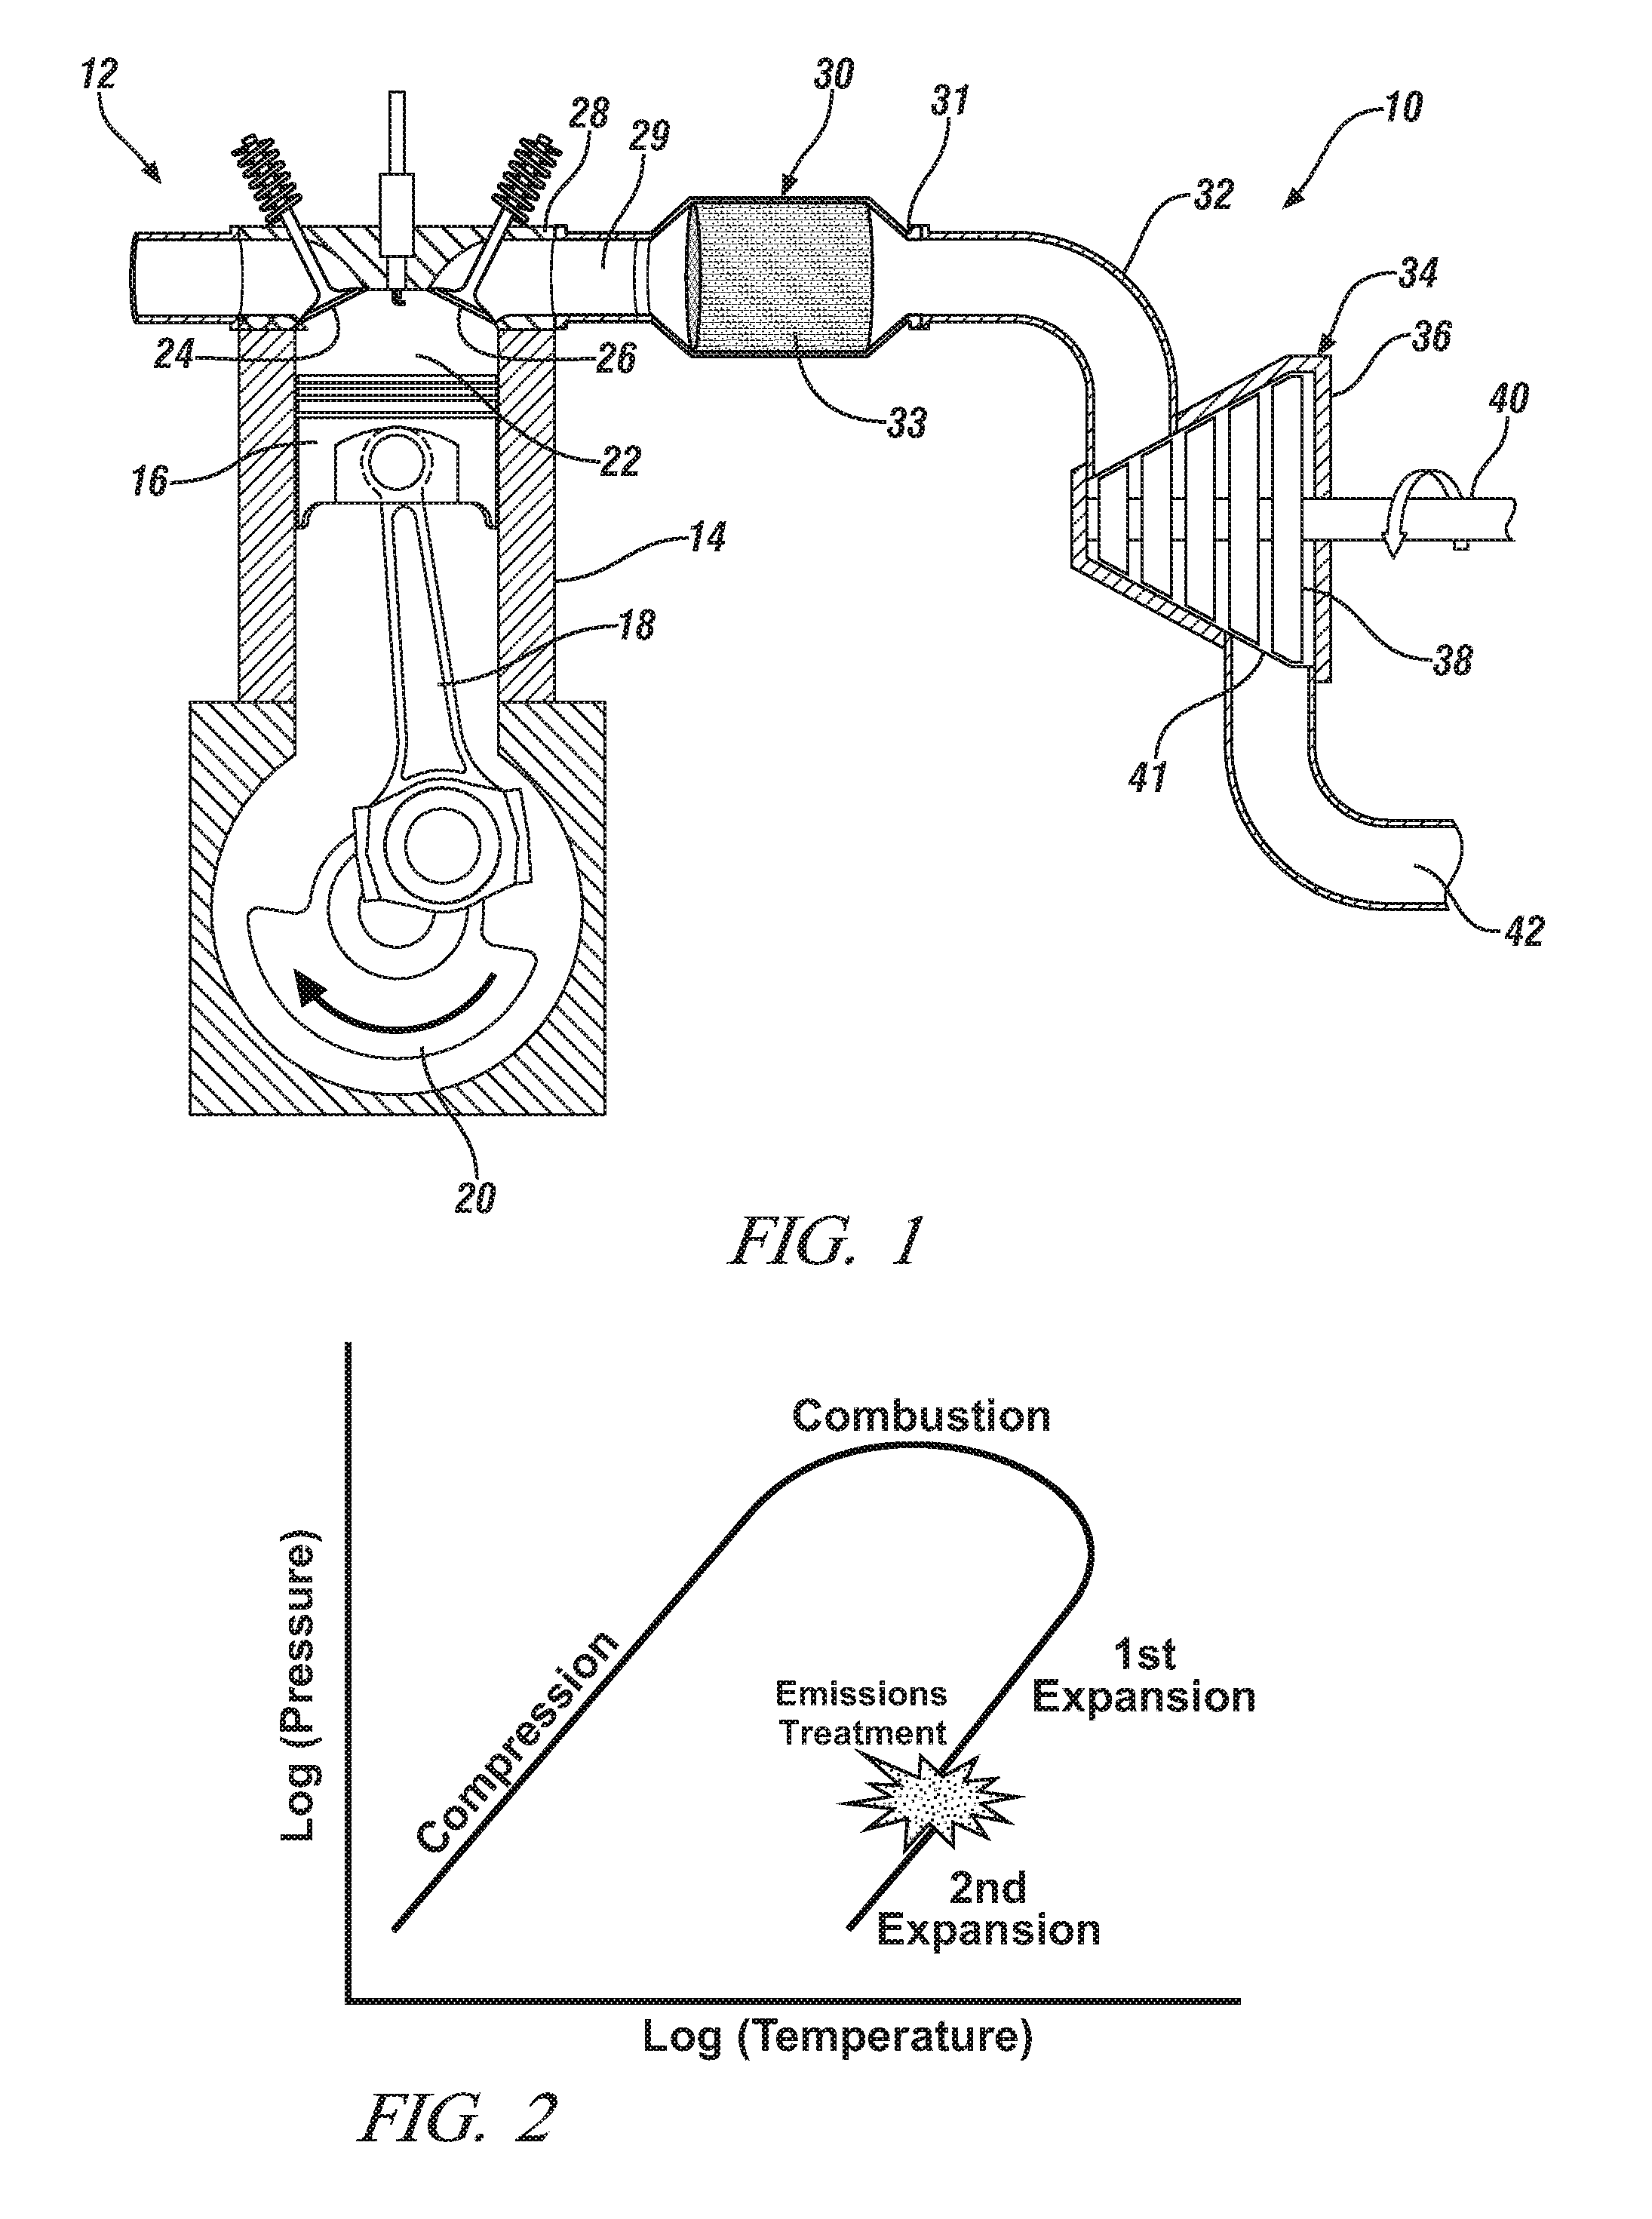 Internal combustion engine with emission treatment interposed between two expansion phases